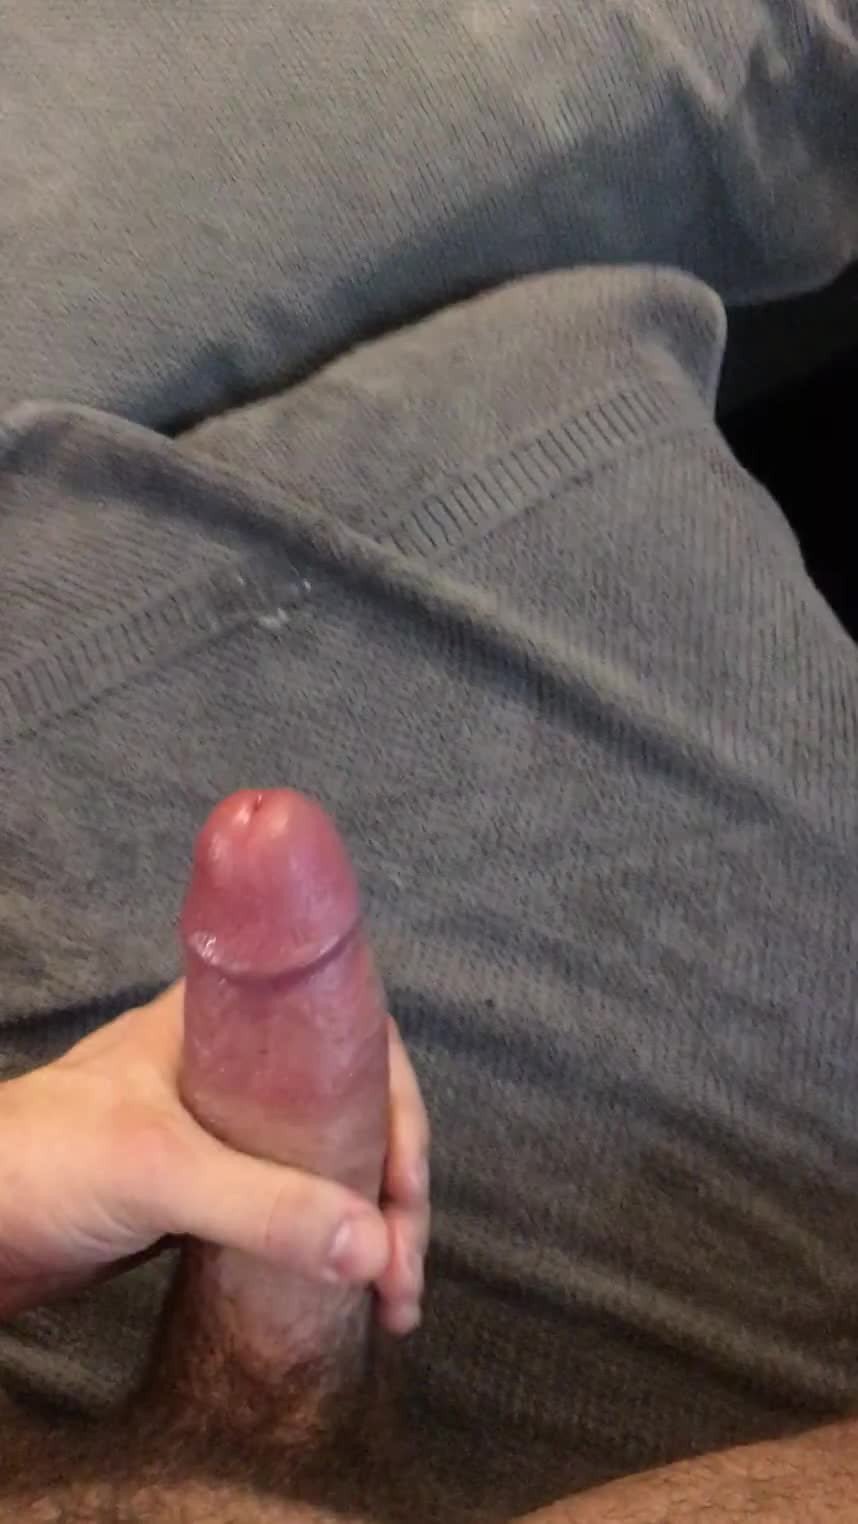 Watch the Video by CumJunky69 with the username @CumJunky69, posted on August 9, 2022. The post is about the topic GUYS MASTURBATING & SQUIRTING CUM.